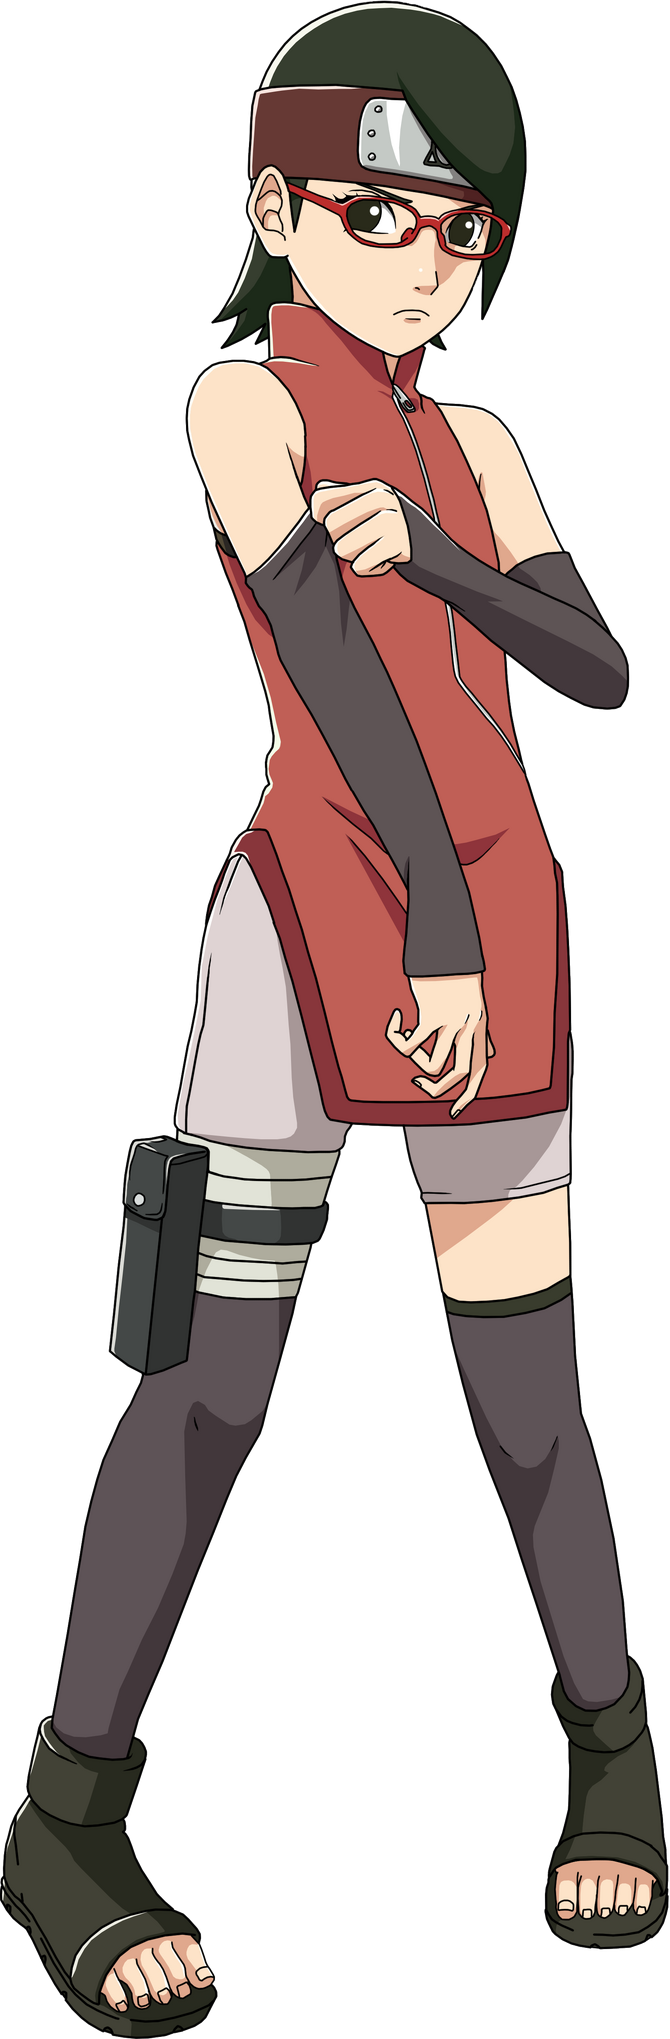 Naruto: The Seventh Hokage and the Scarlet Spring - Wikipedia